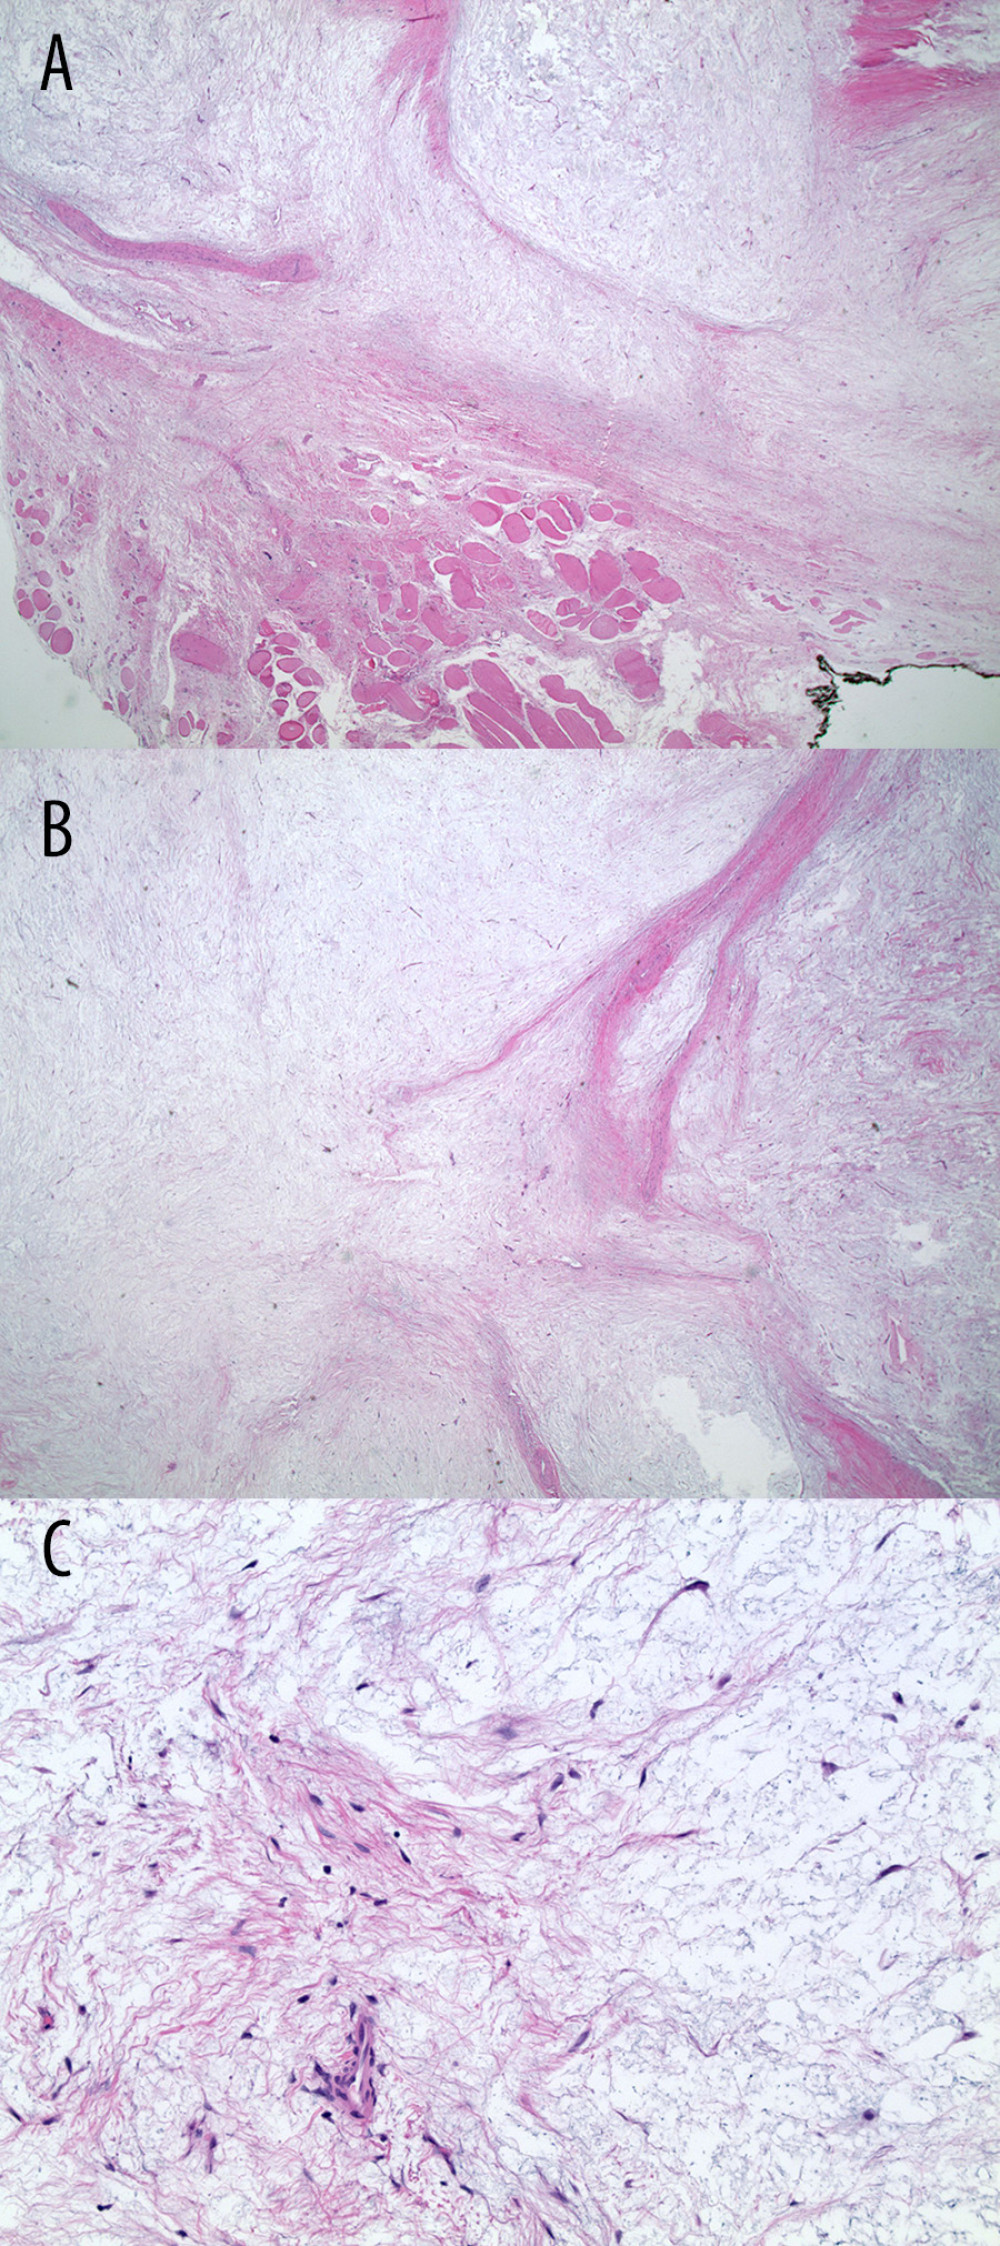 Histopathology slides of biopsied left deltoid muscle mass. (A) Entrapped skeletal muscle fibers at the periphery of the tumor (lower half represents the skeletal muscle fibers which are splayed by the tumor cells). (B) The tumor is a hypocellular lesion composed of bland cells in a background of abundant extracellular myxoid stroma. (C) Small capillary-sized vessels are seen. Necrosis and mitotic figures are not identified. Uniform spindle-to-stellate-shaped cells with uniform oval nuclei and indistinct eosinophilic cytoplasm are noted.